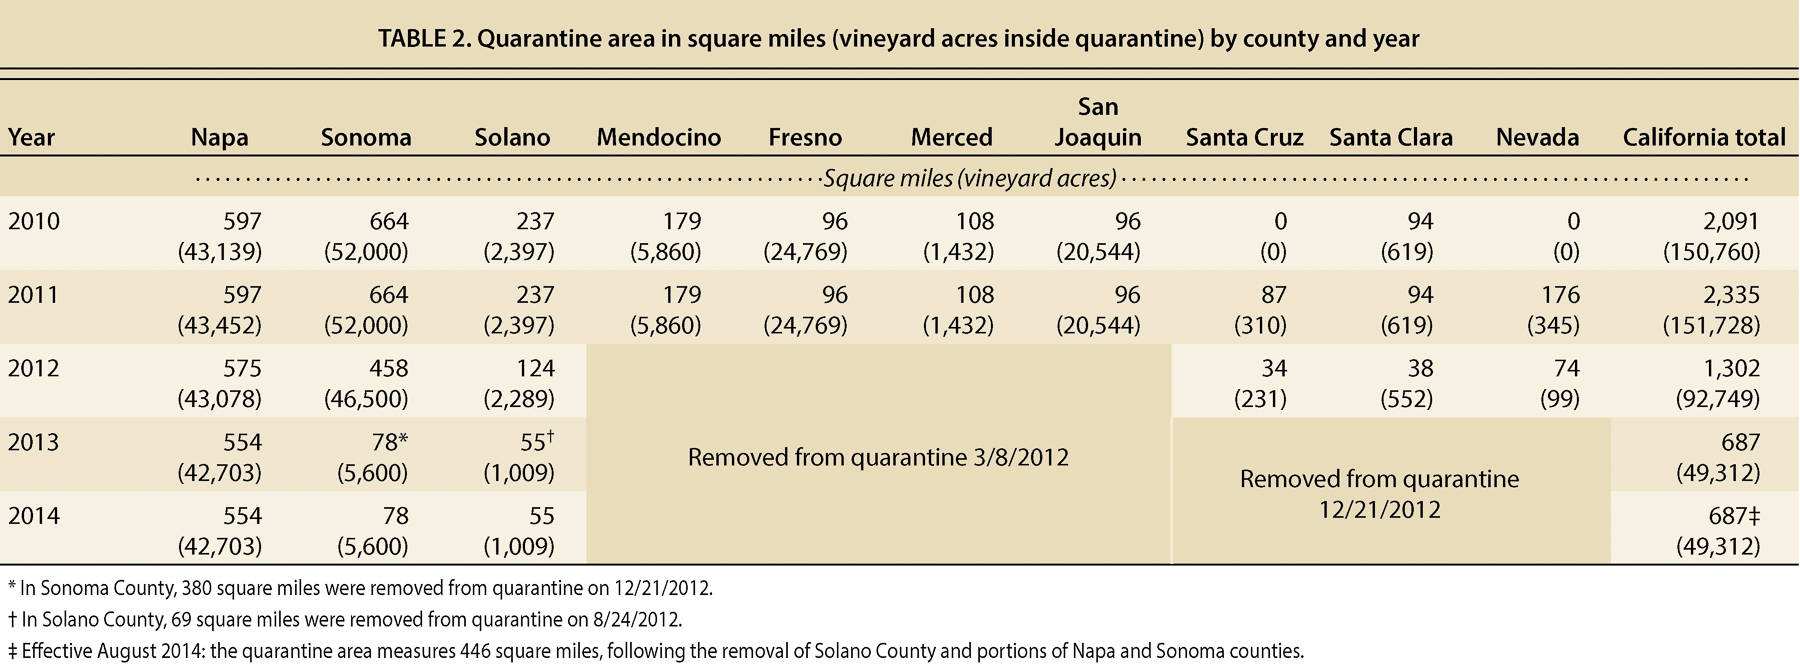 Quarantine area in square miles (vineyard acres inside quarantine) by county and year